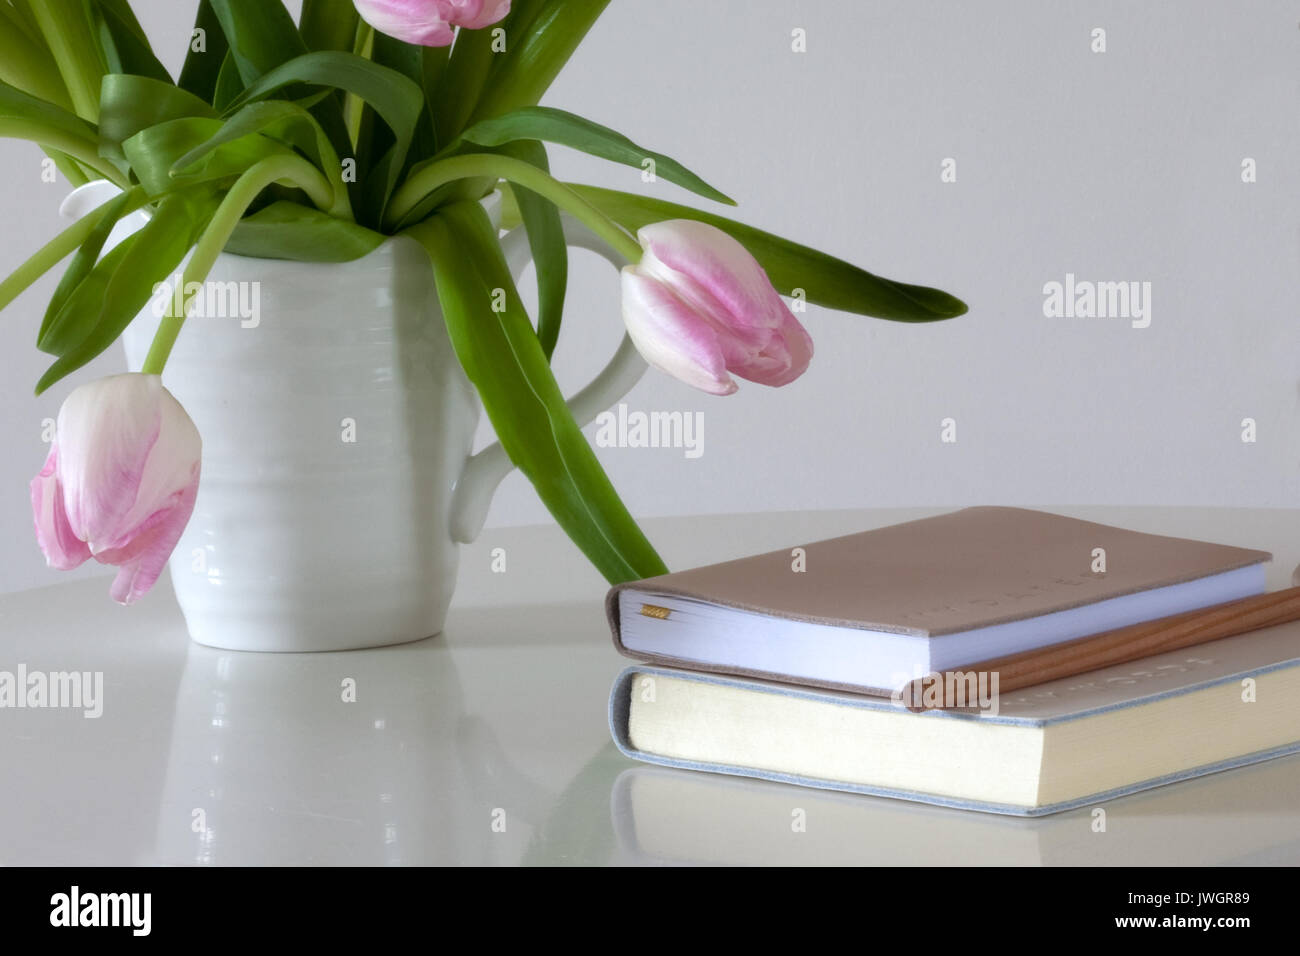 colour image of pale pink tulips Stock Photo